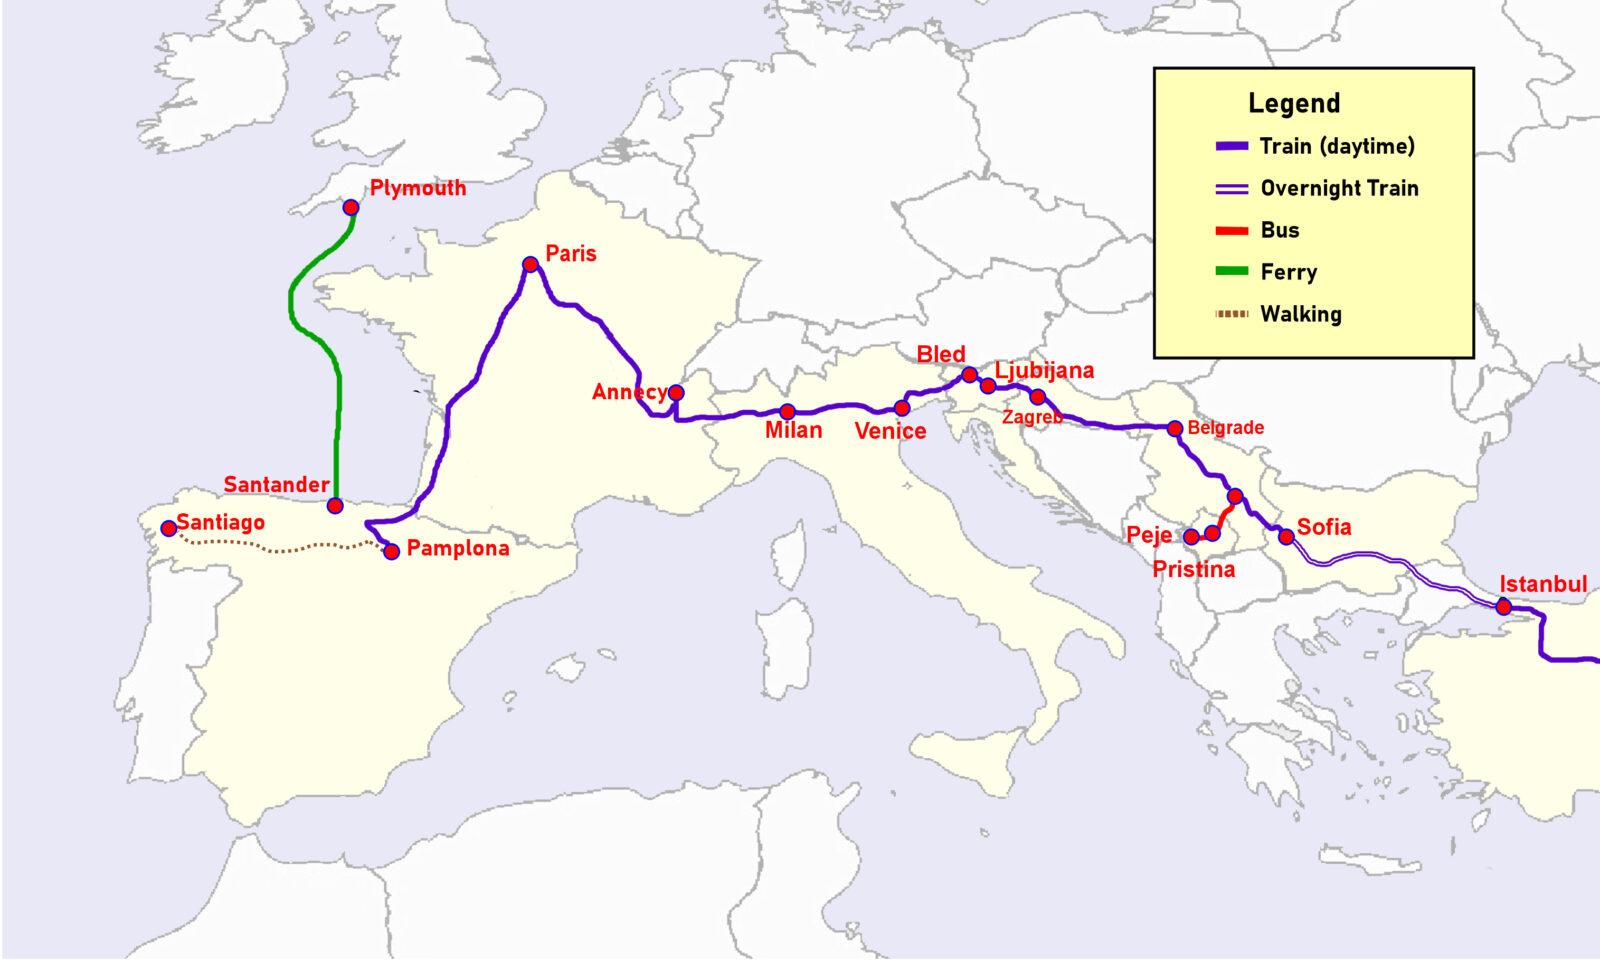 Map of the train journey from Istanbul to the UK